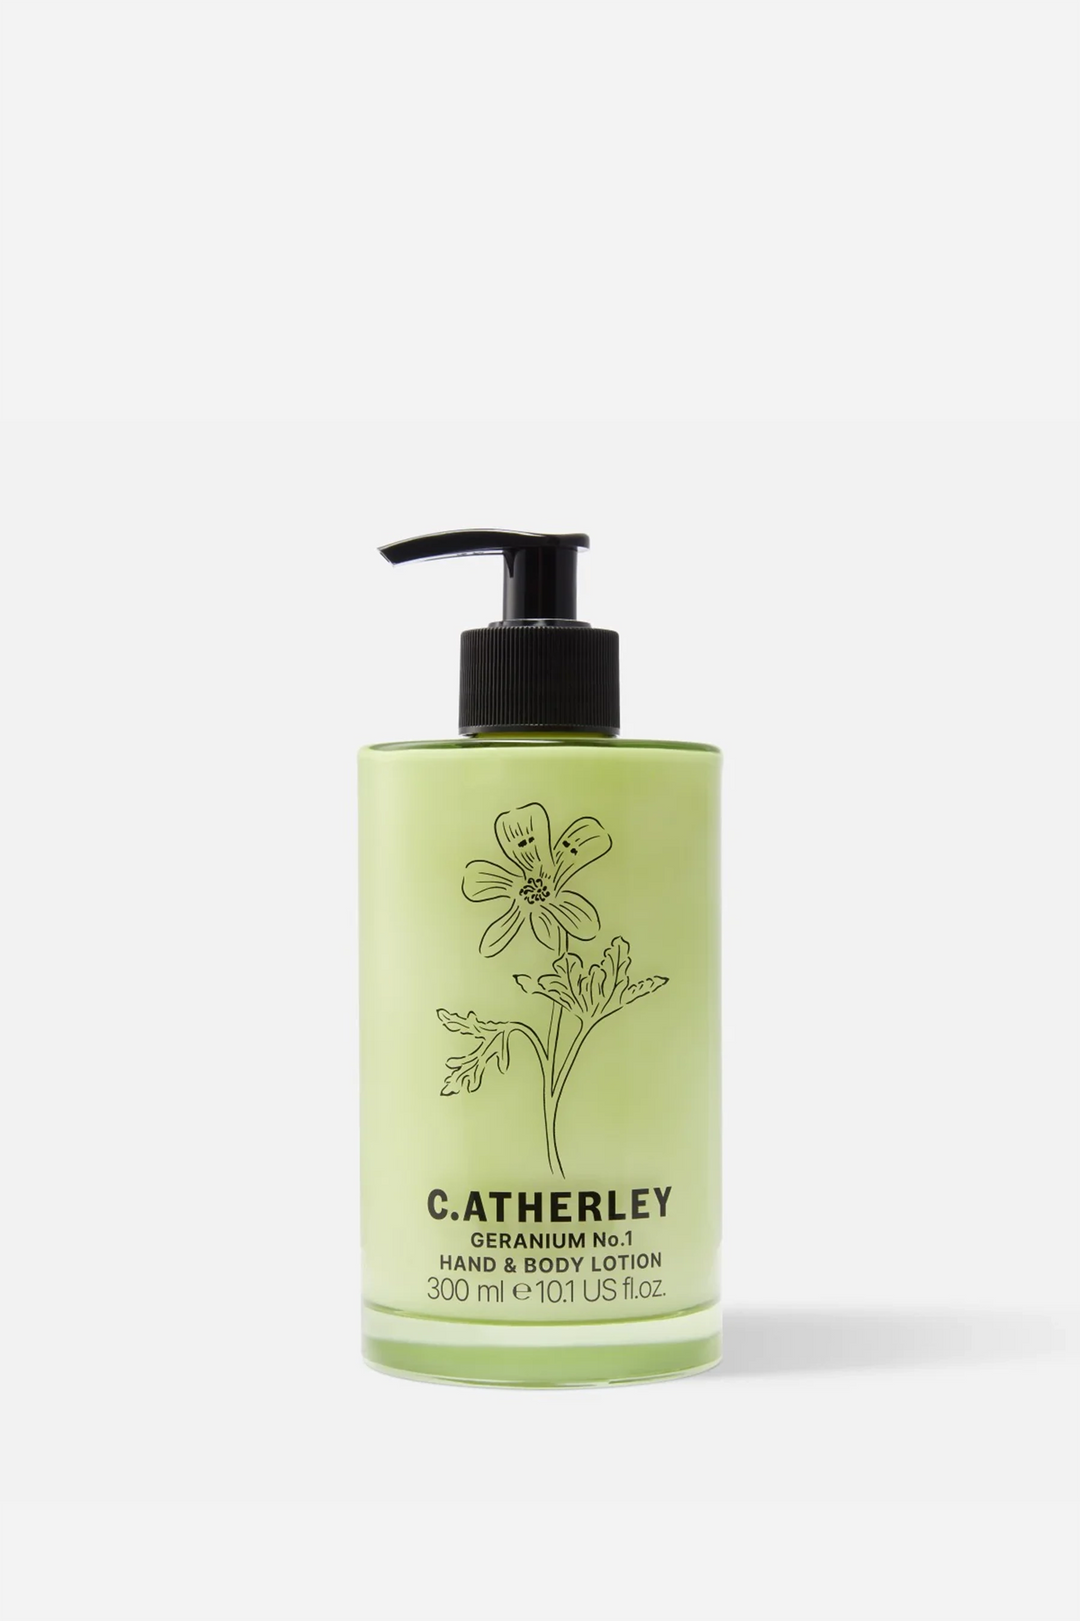 C. Atherley Hand & Body Lotion / 300ml